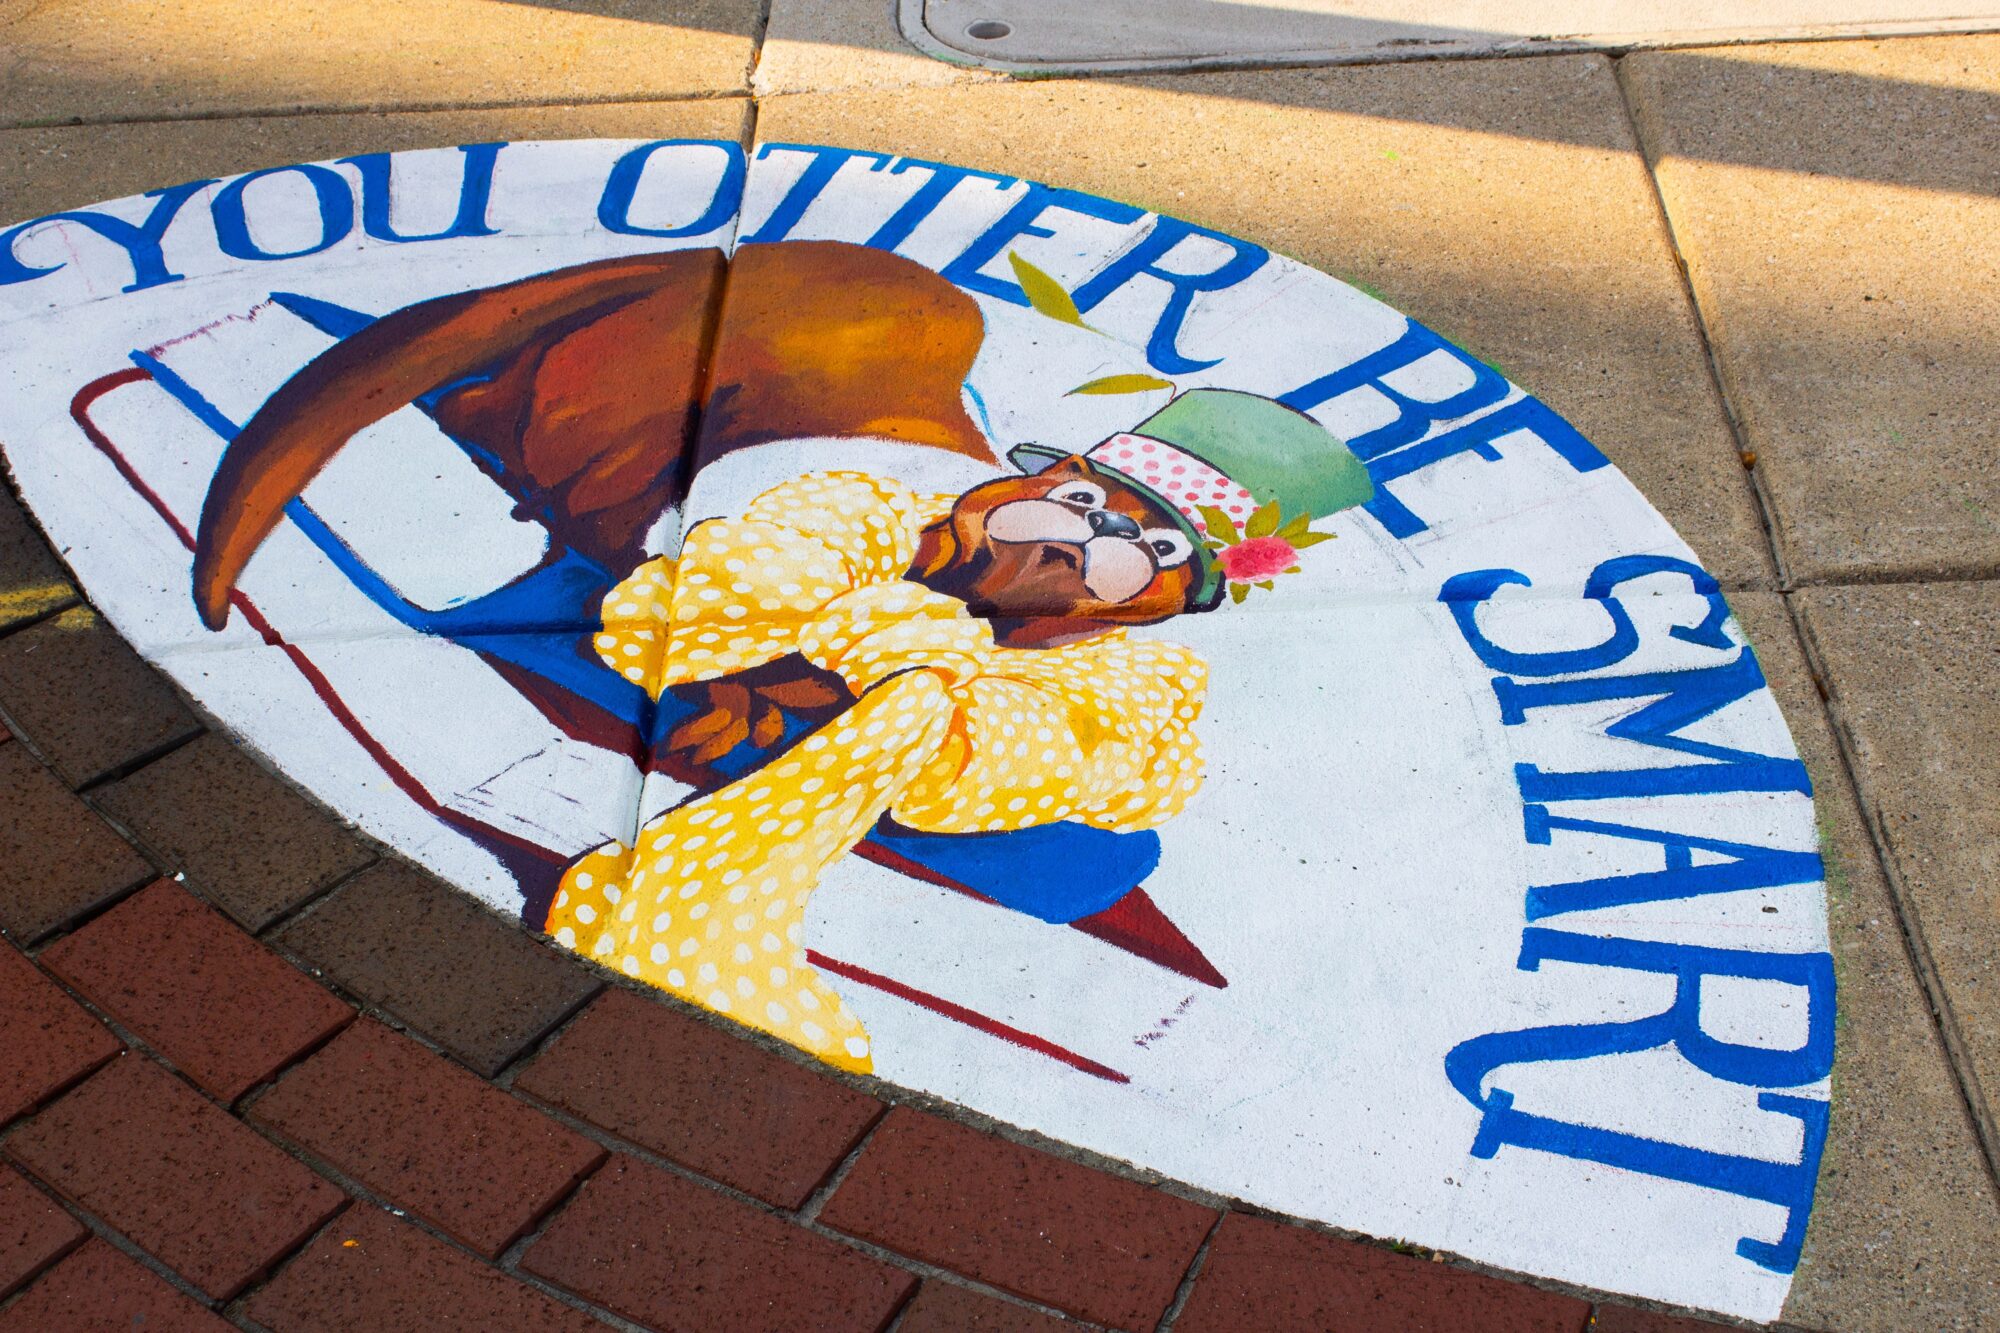 Clean Drains mural depicting an otter on top of books that says "You Otter Be Smart".